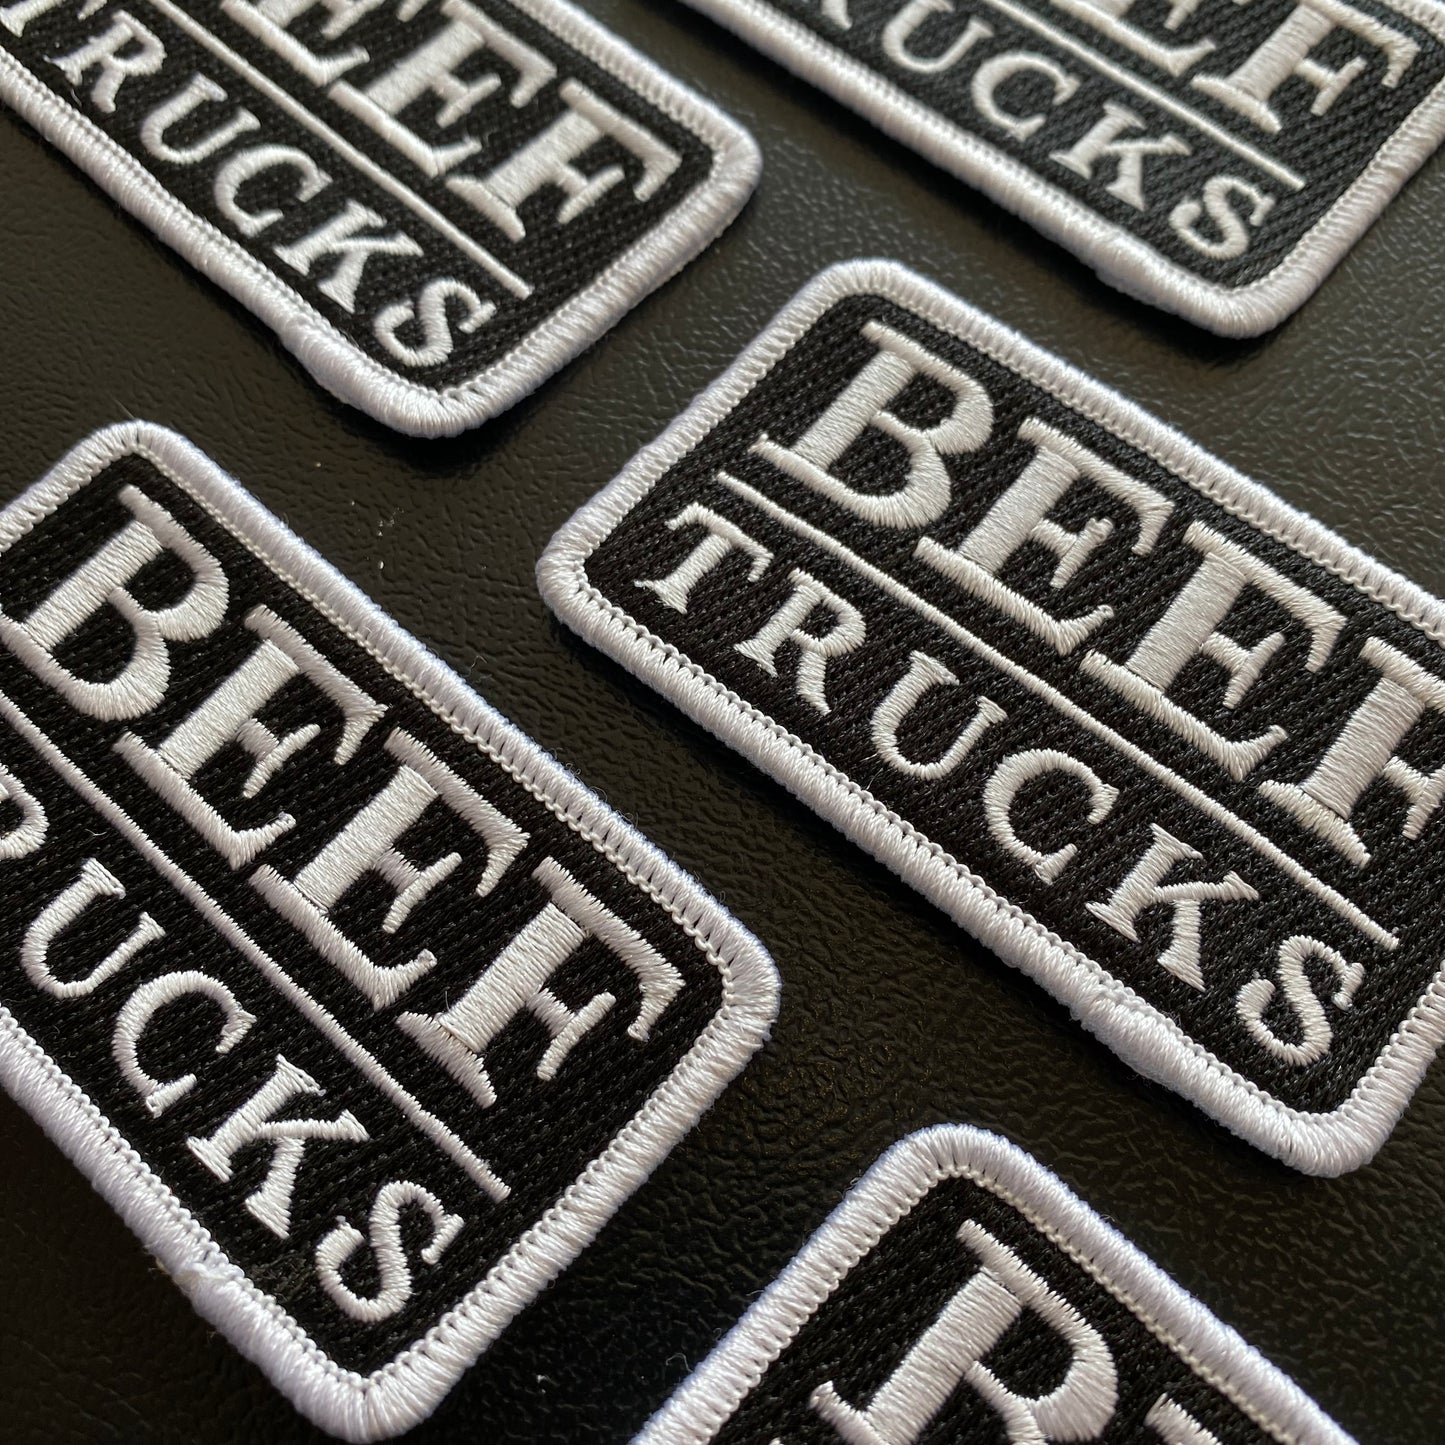 BEEF LOGO PATCH